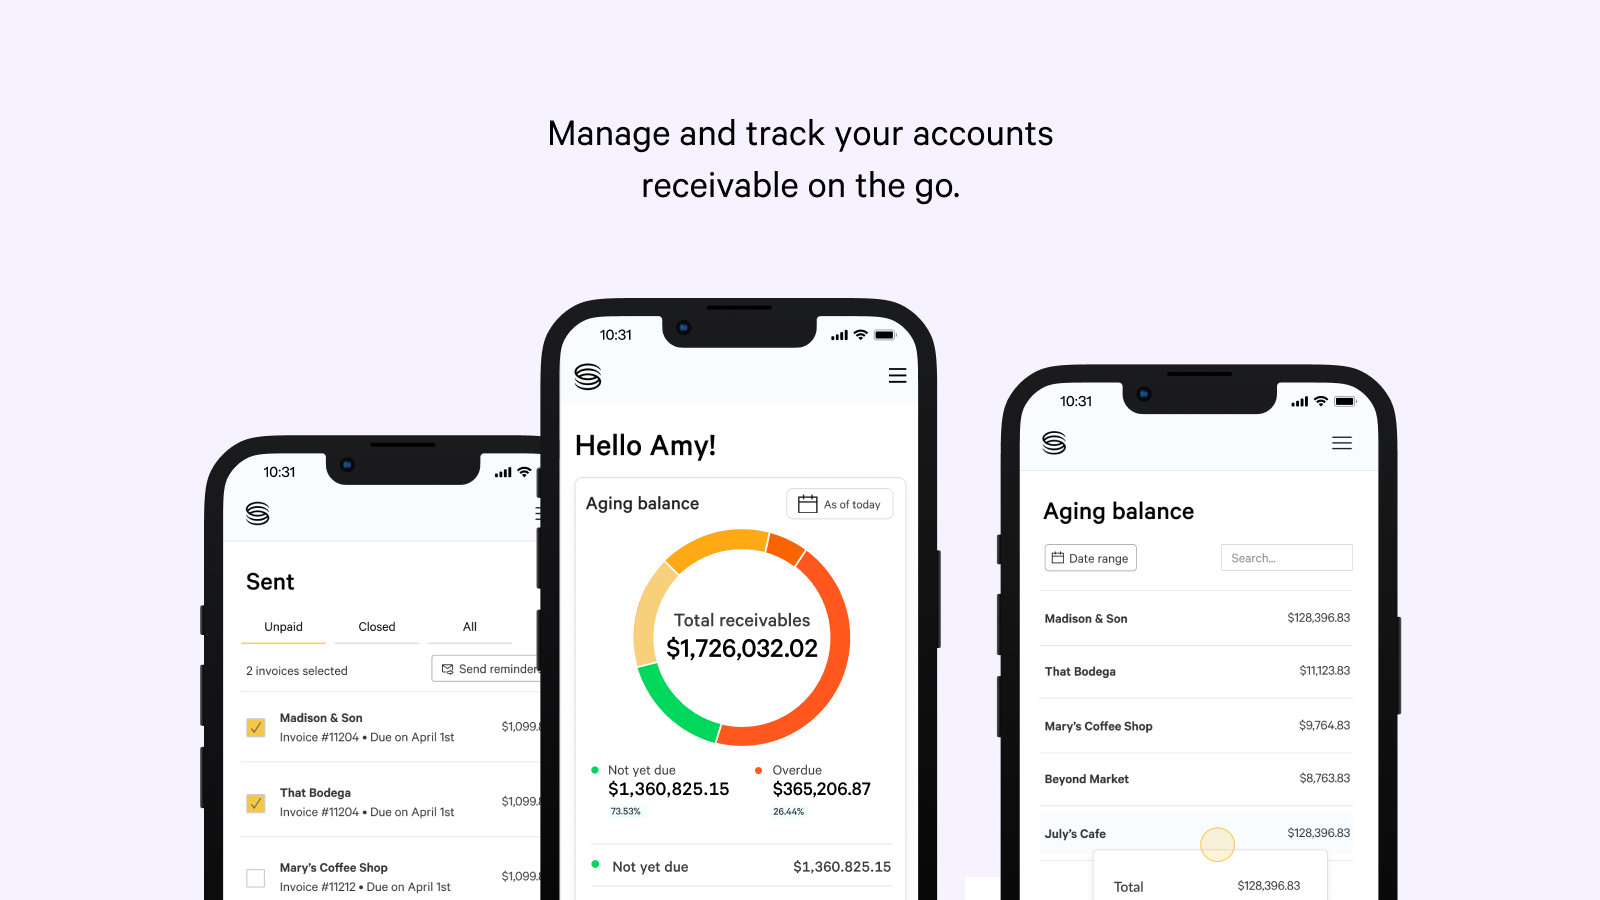 Manage and track your accounts receivable on the go